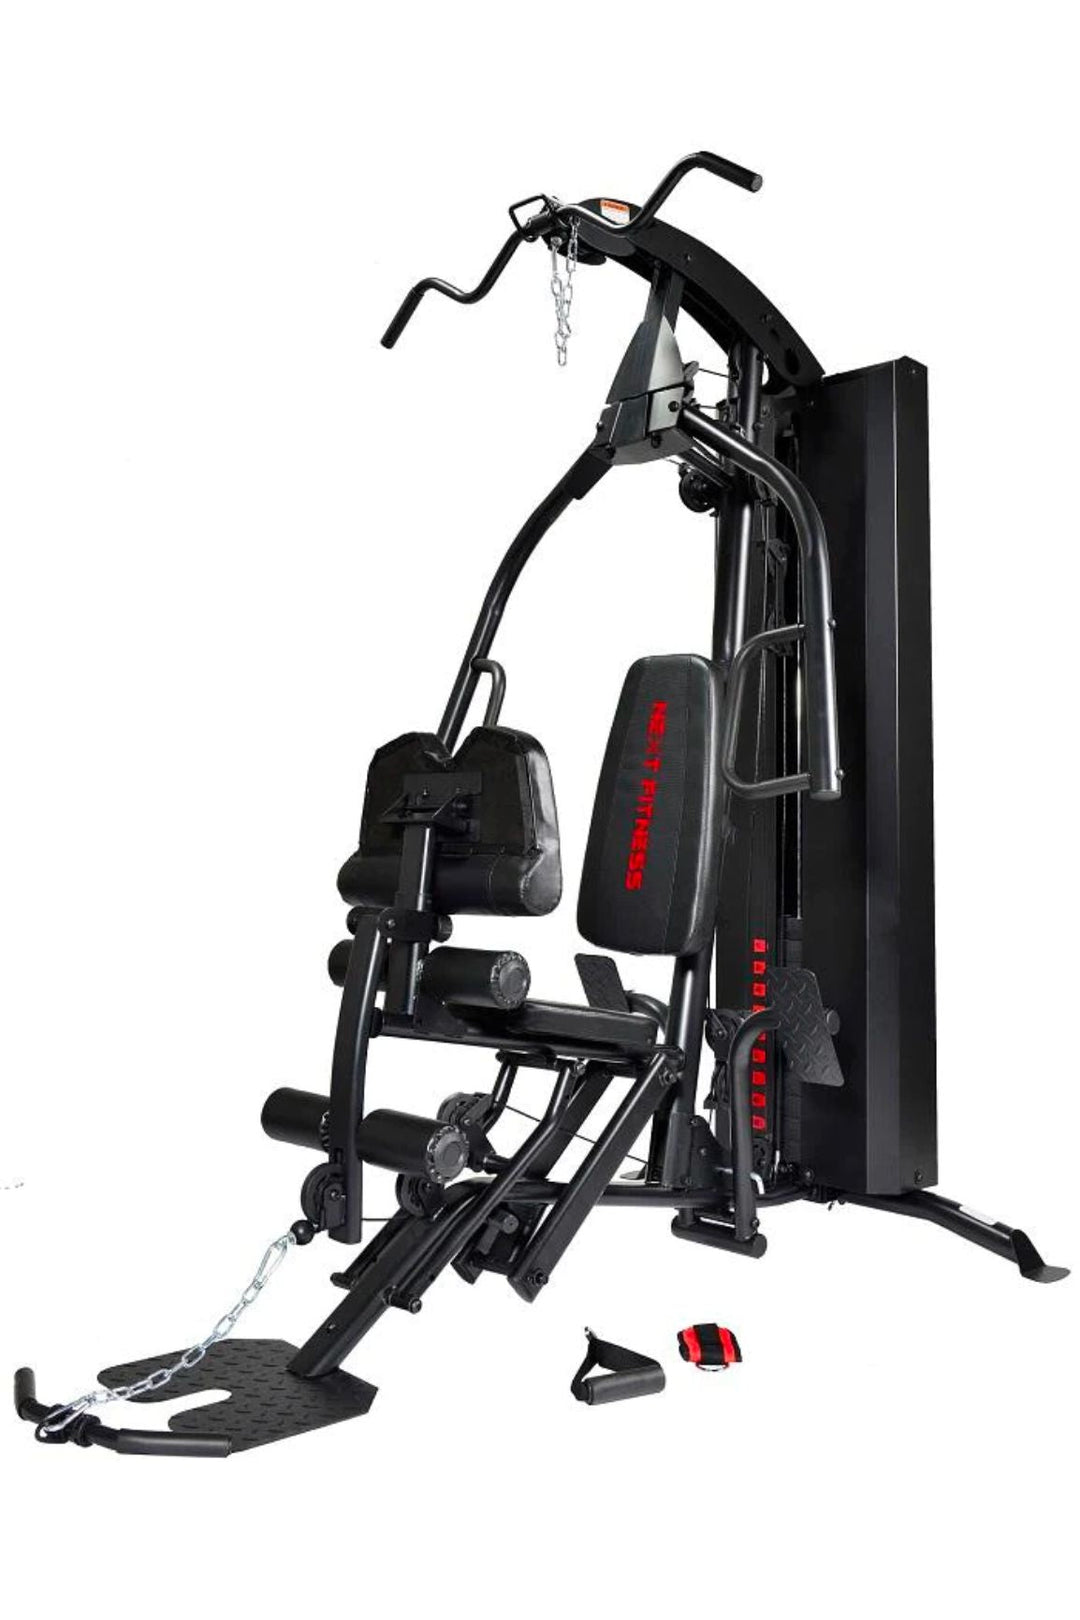 Black Next Fitness Multi Station cable gym